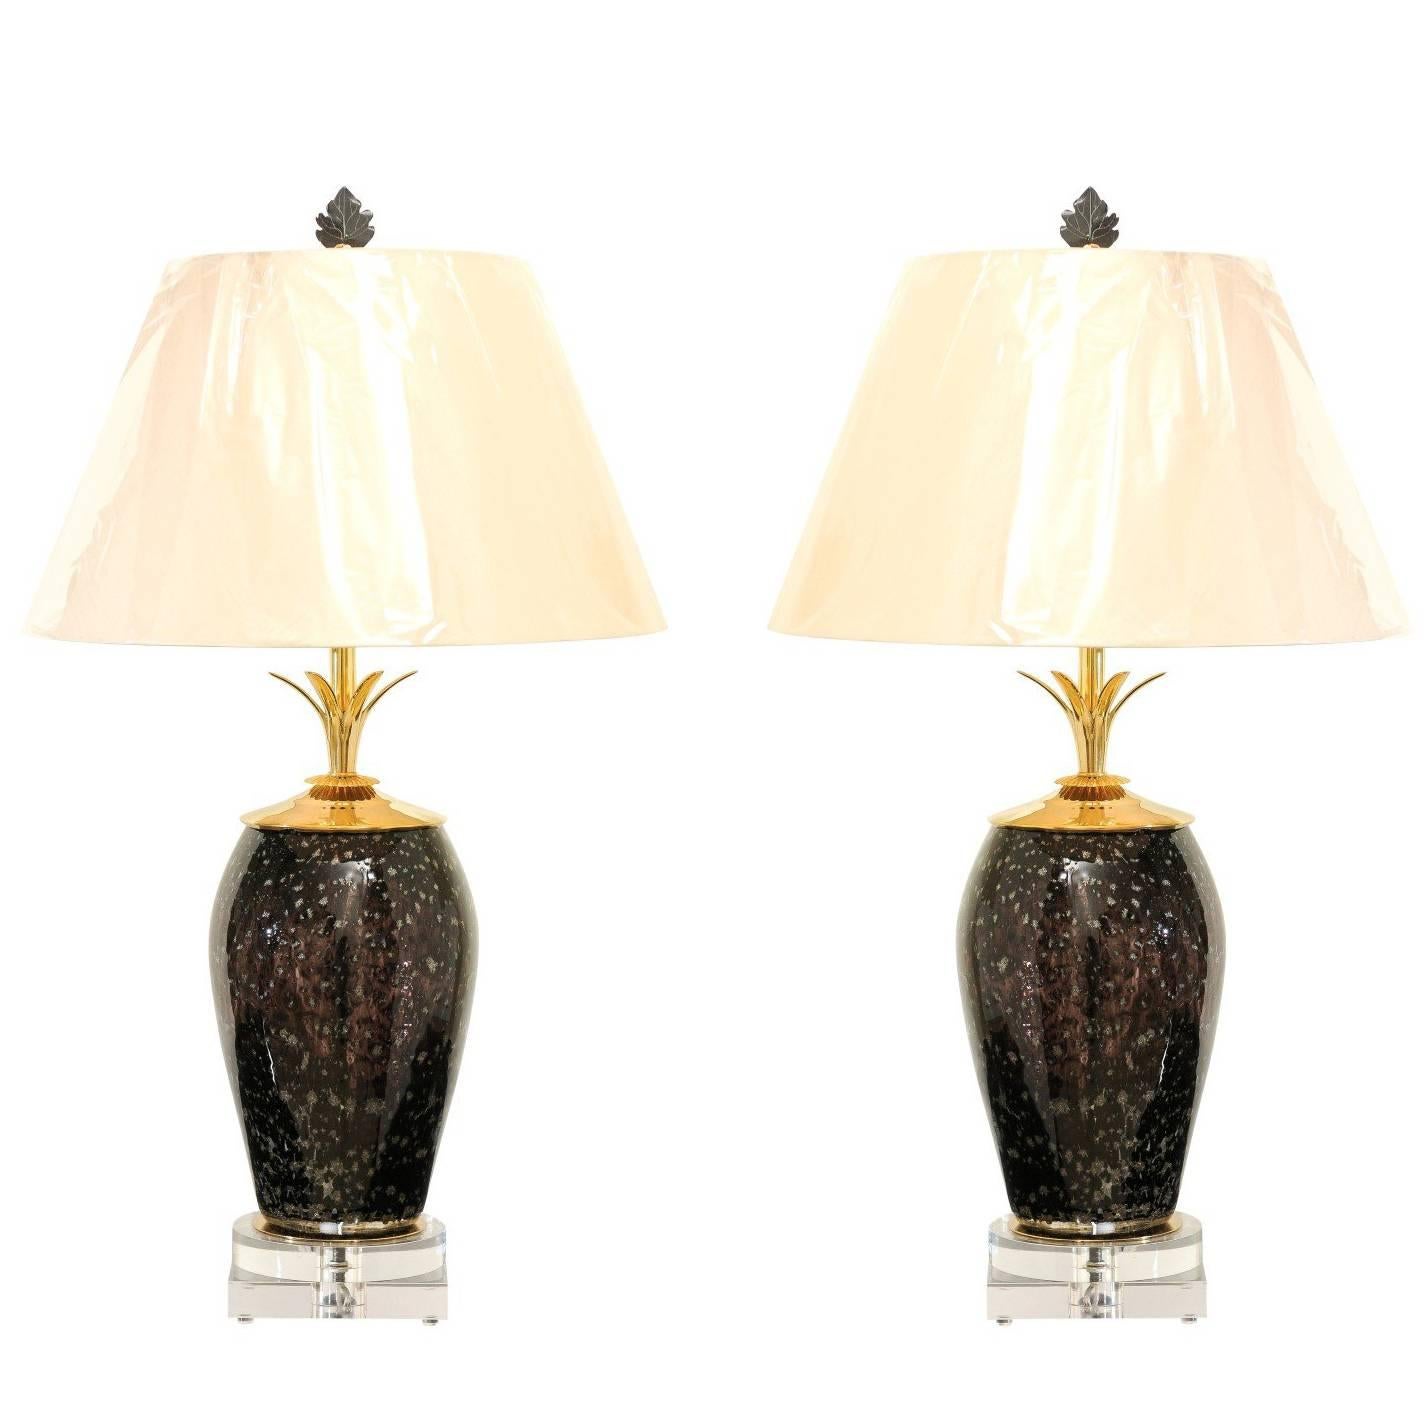 Exceptional Pair of Italian Granite Style Blown Glass Vases as Custom Lamps